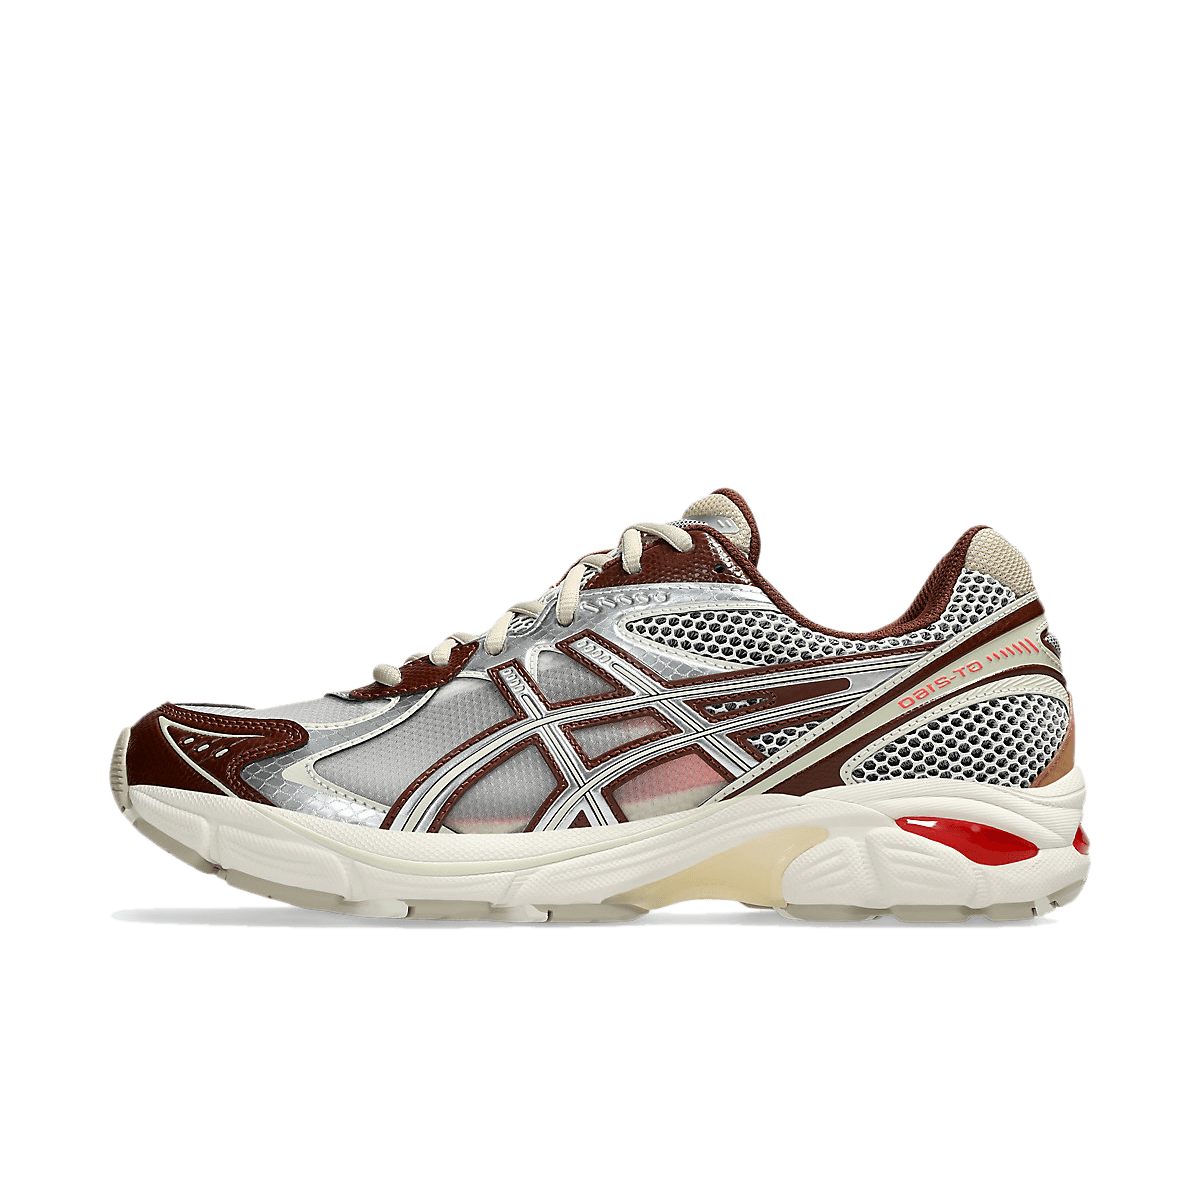 Above The Clouds x ASICS GT-2160 'Chocolate Brown'